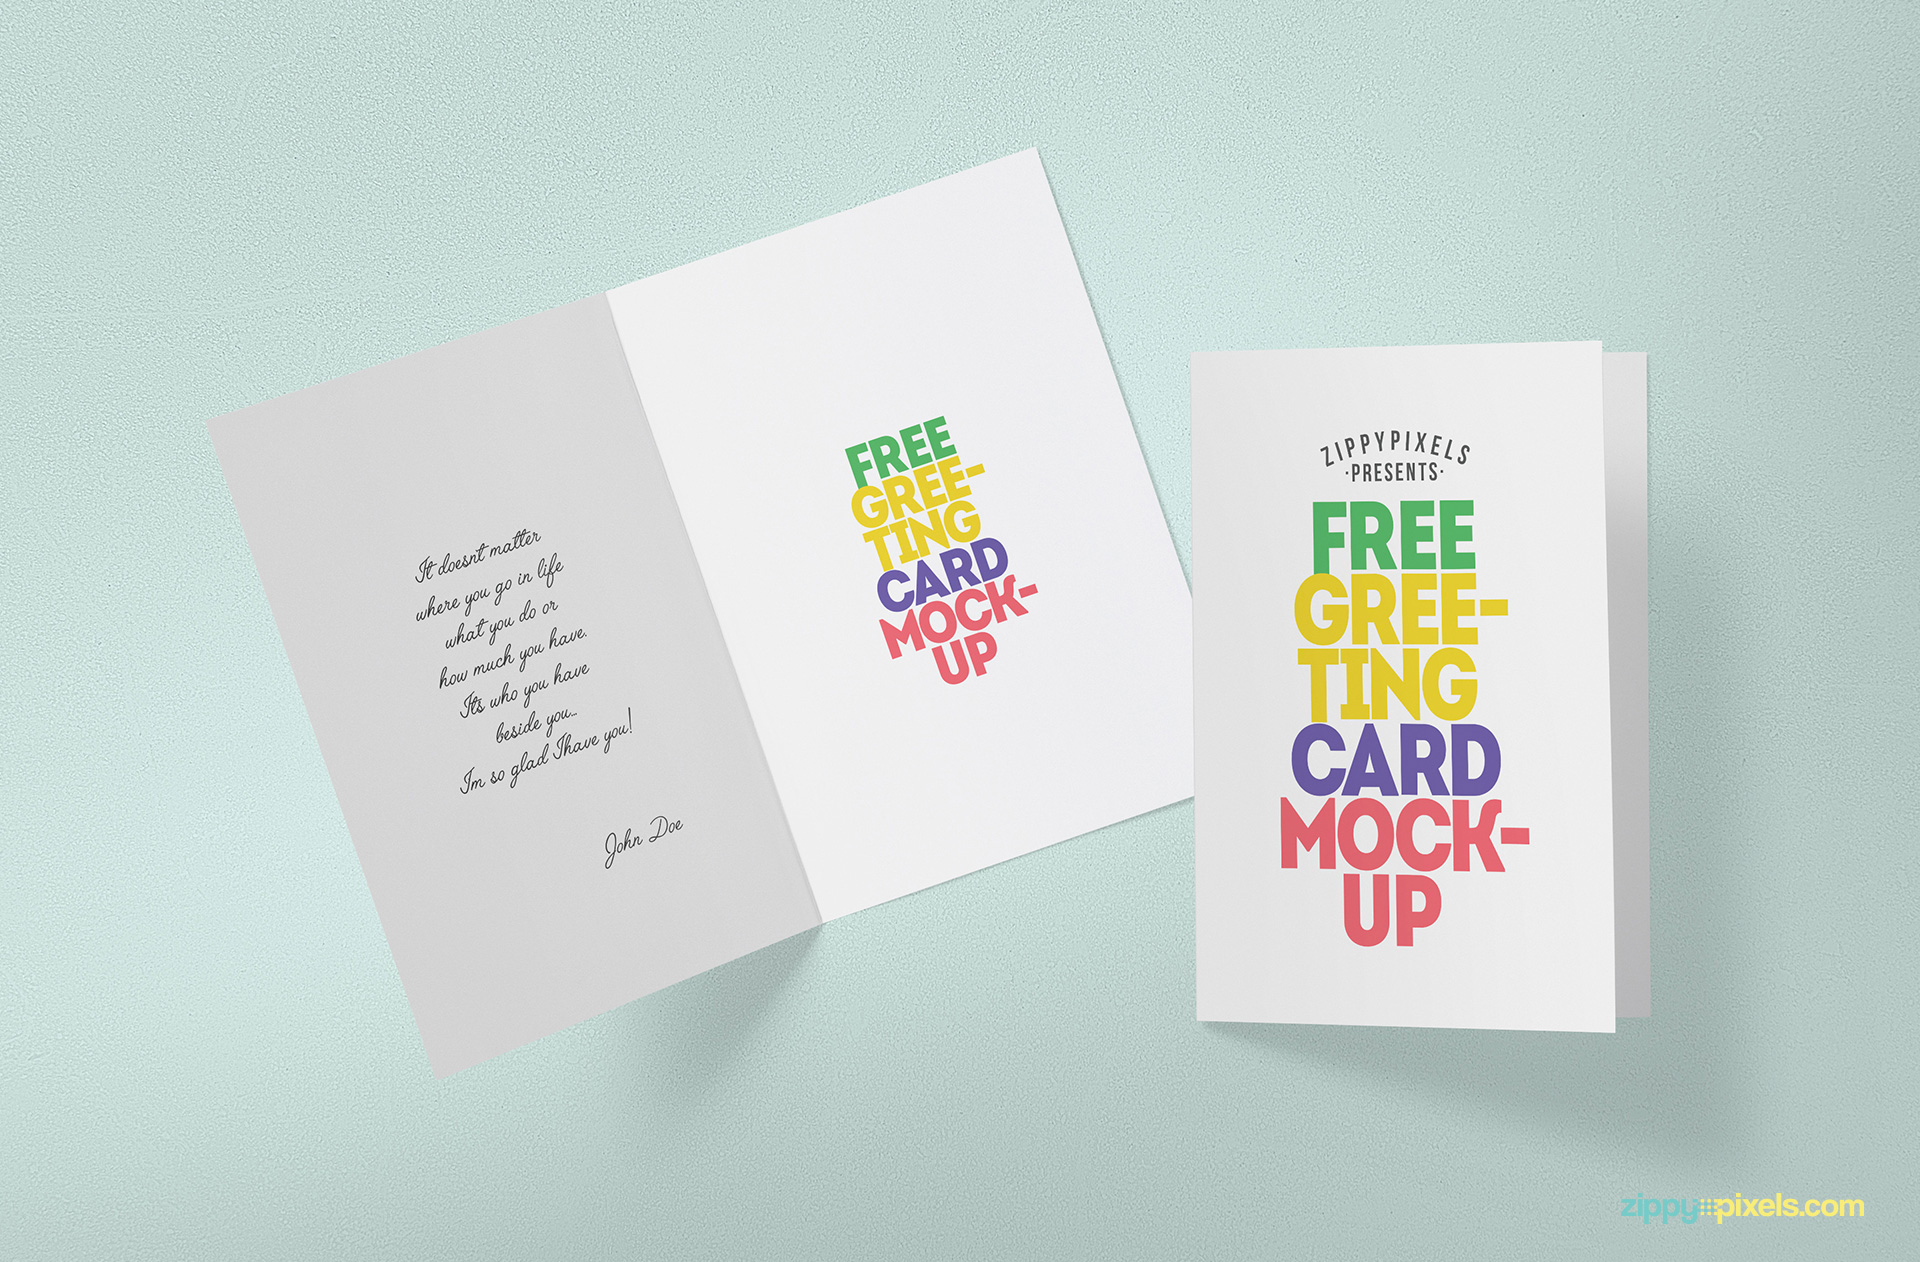 Free greeting card mockup with customizable design